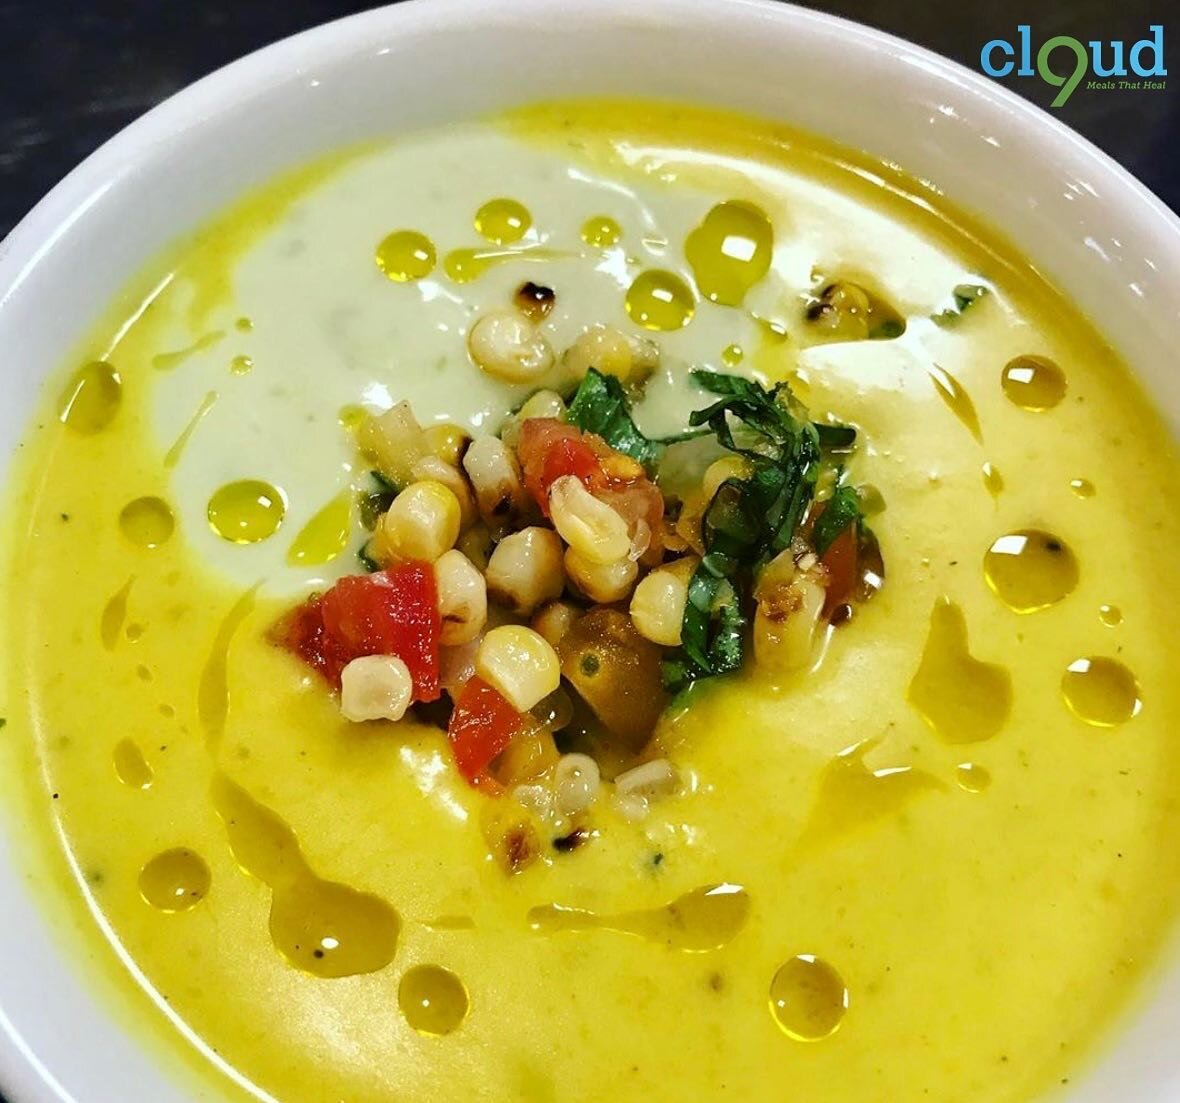 Chilled Avocado Crookneck Squash Yogurt Soup, Sweet Corn Relish. A delicious bowl of infused yummy. #cannabischef #mealsthatheal #cbdmeals #cookingwithcannabis #avocado Join out team!!!